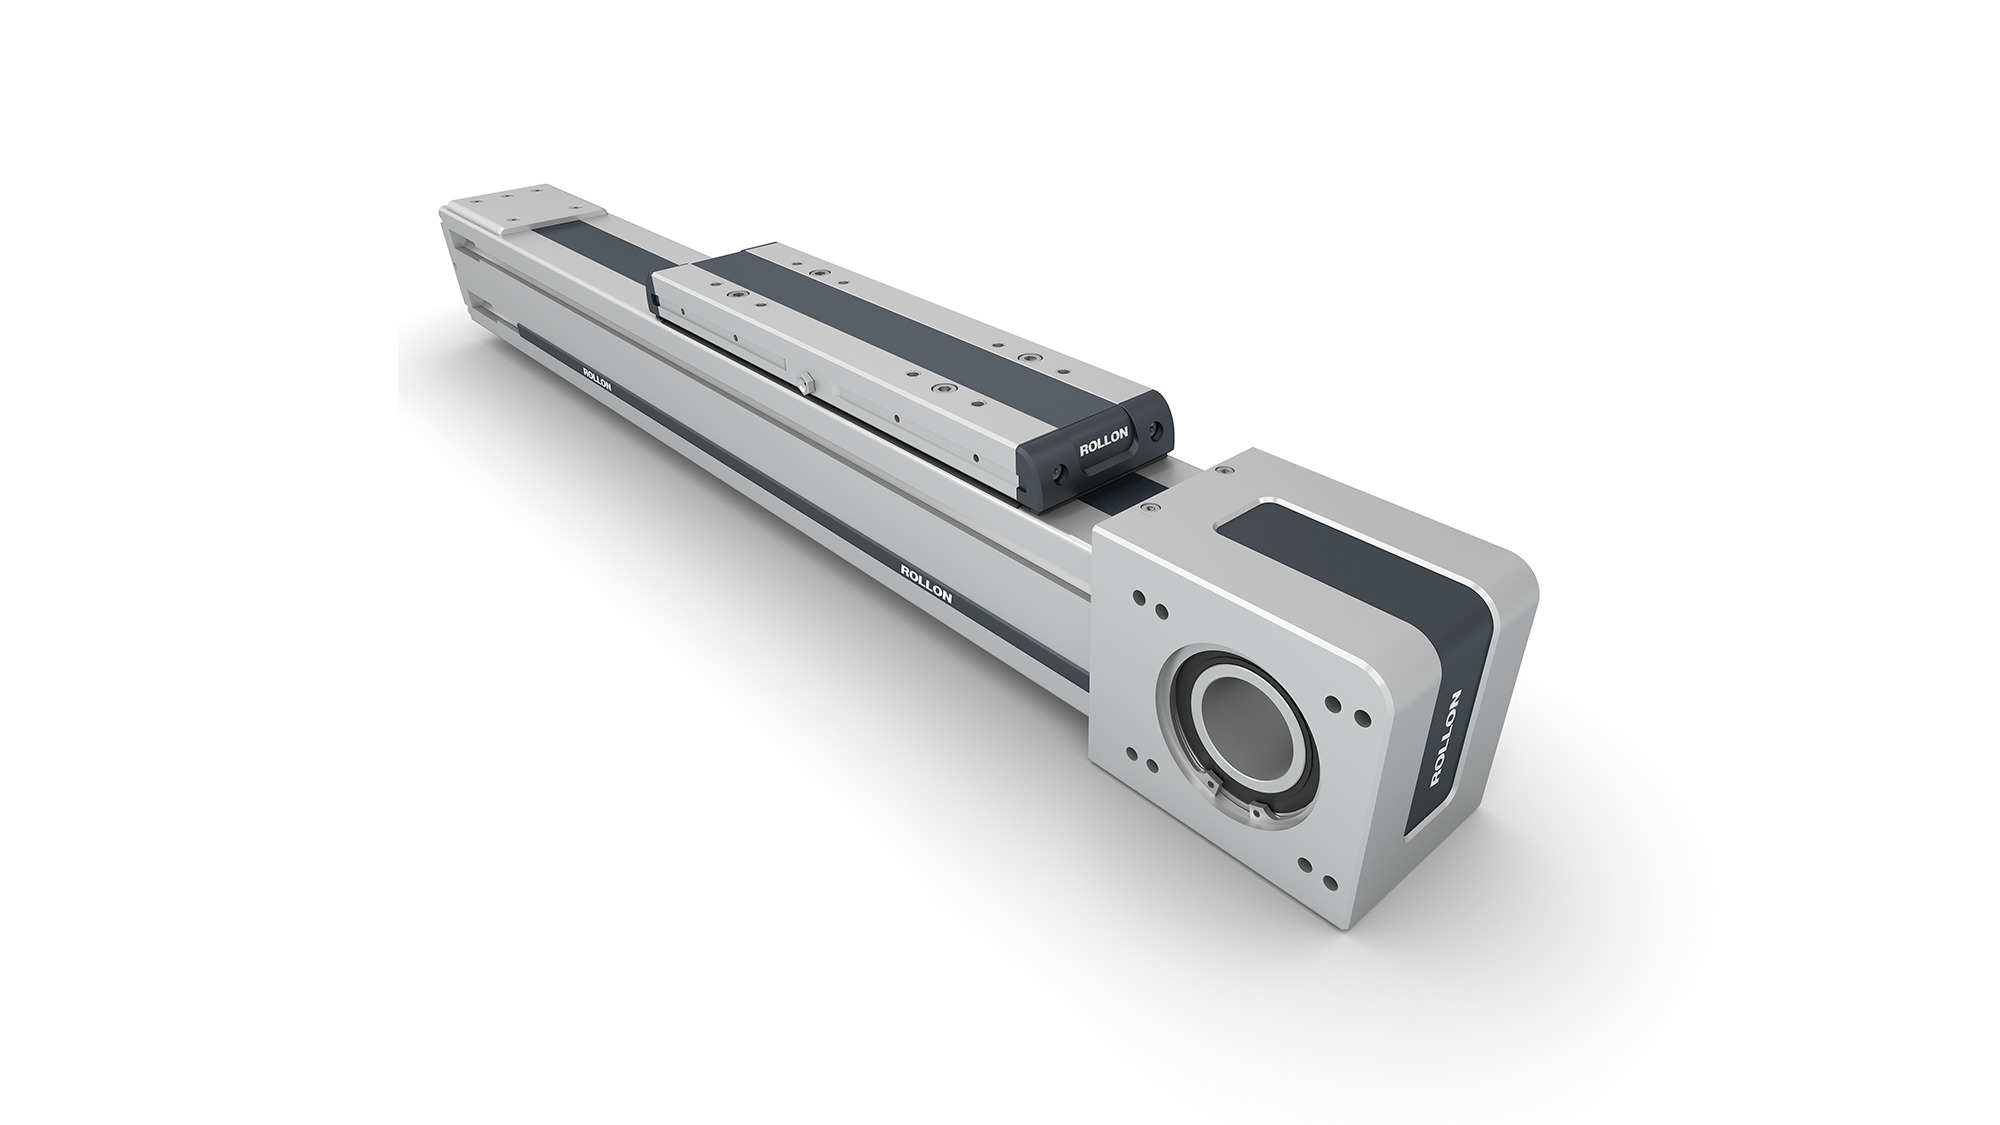 MiniRoller Rail and ELM: Rollon’s answers to the Meat processing industry